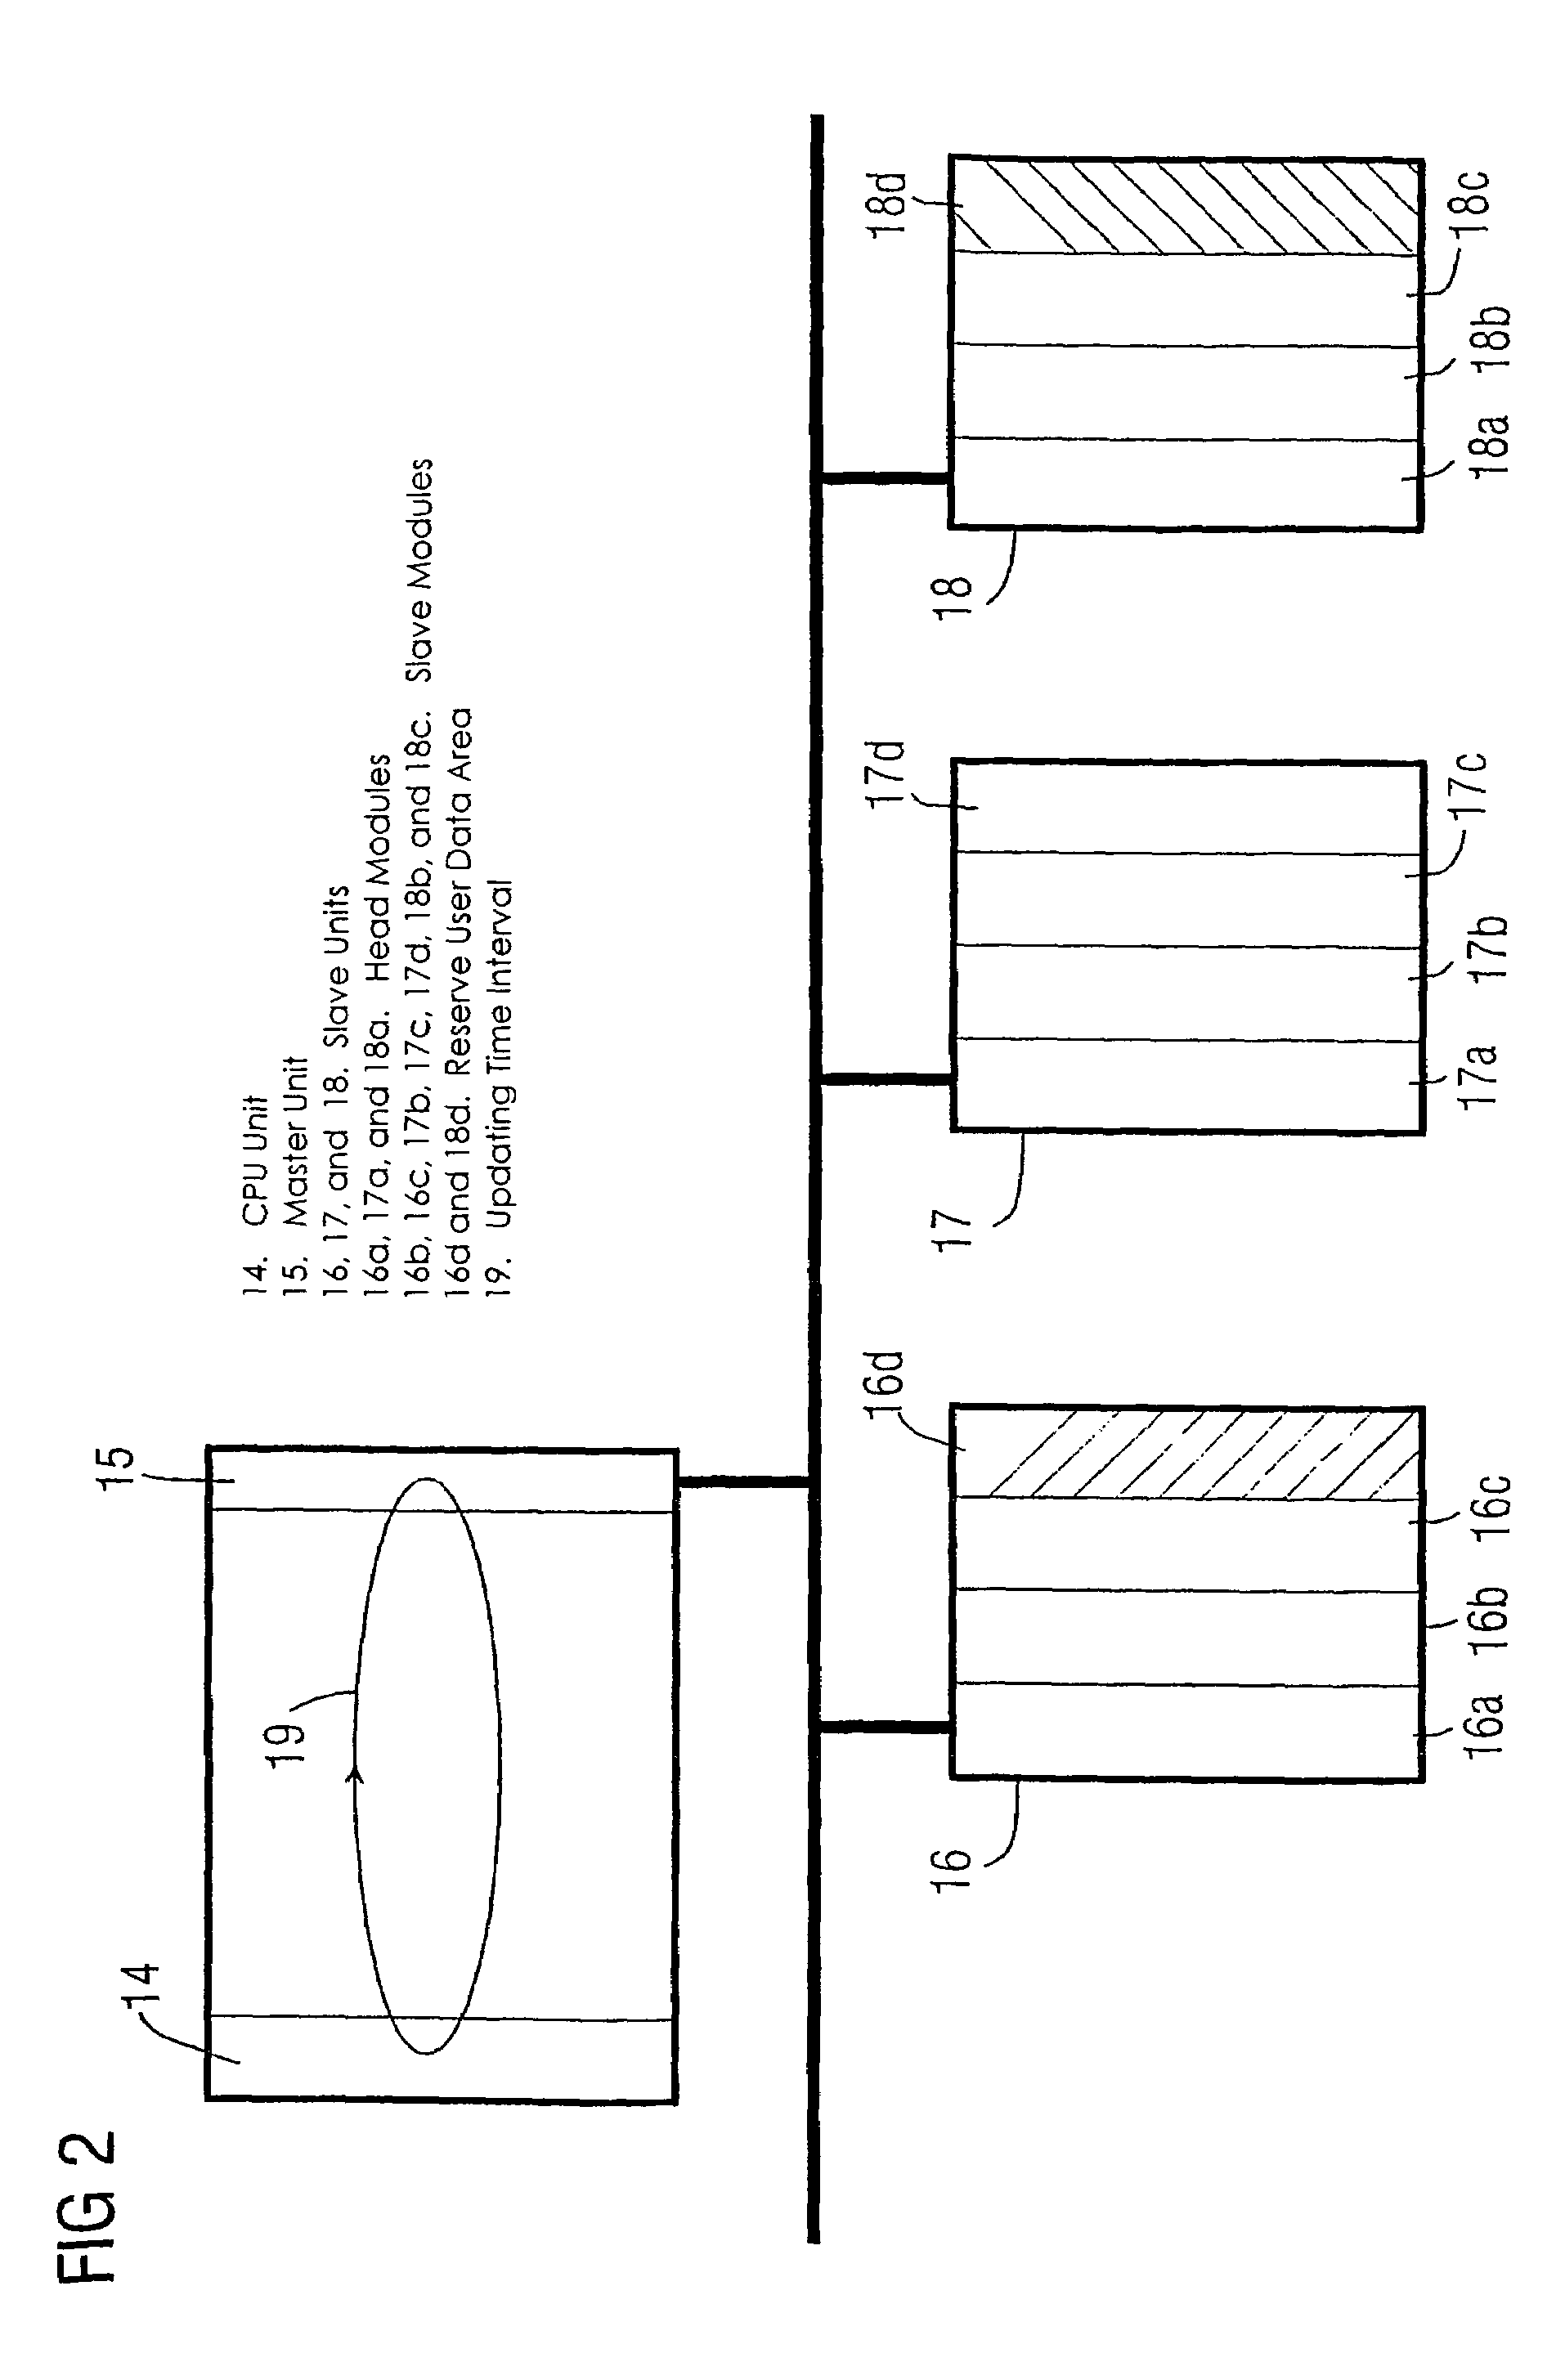 Method for configuring and/or operating an automation device